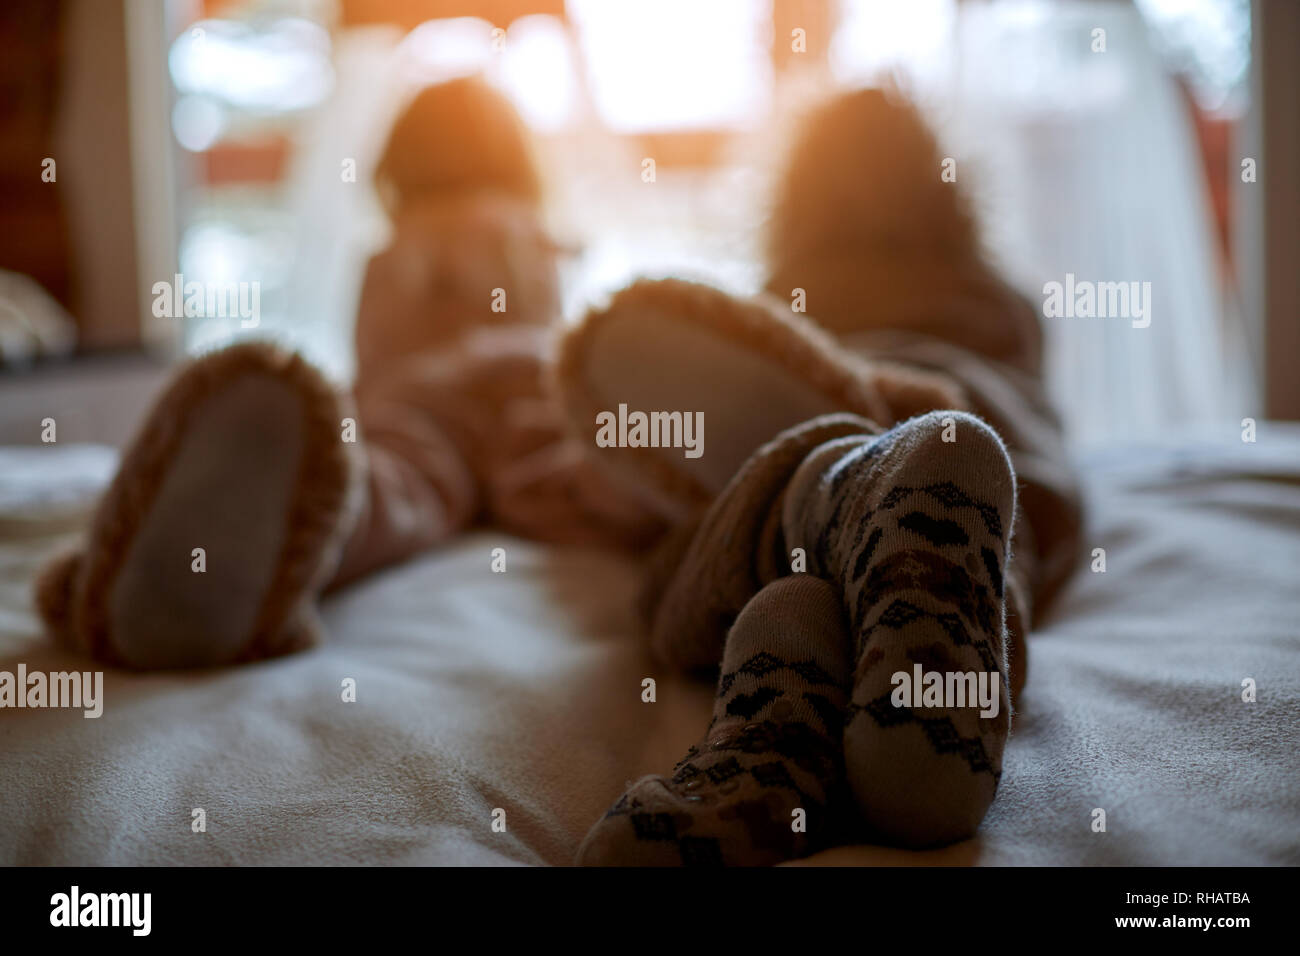 Feet in Christmas socks on the background of the window on a winter sunny day. Warm cozy atmosphere Stock Photo